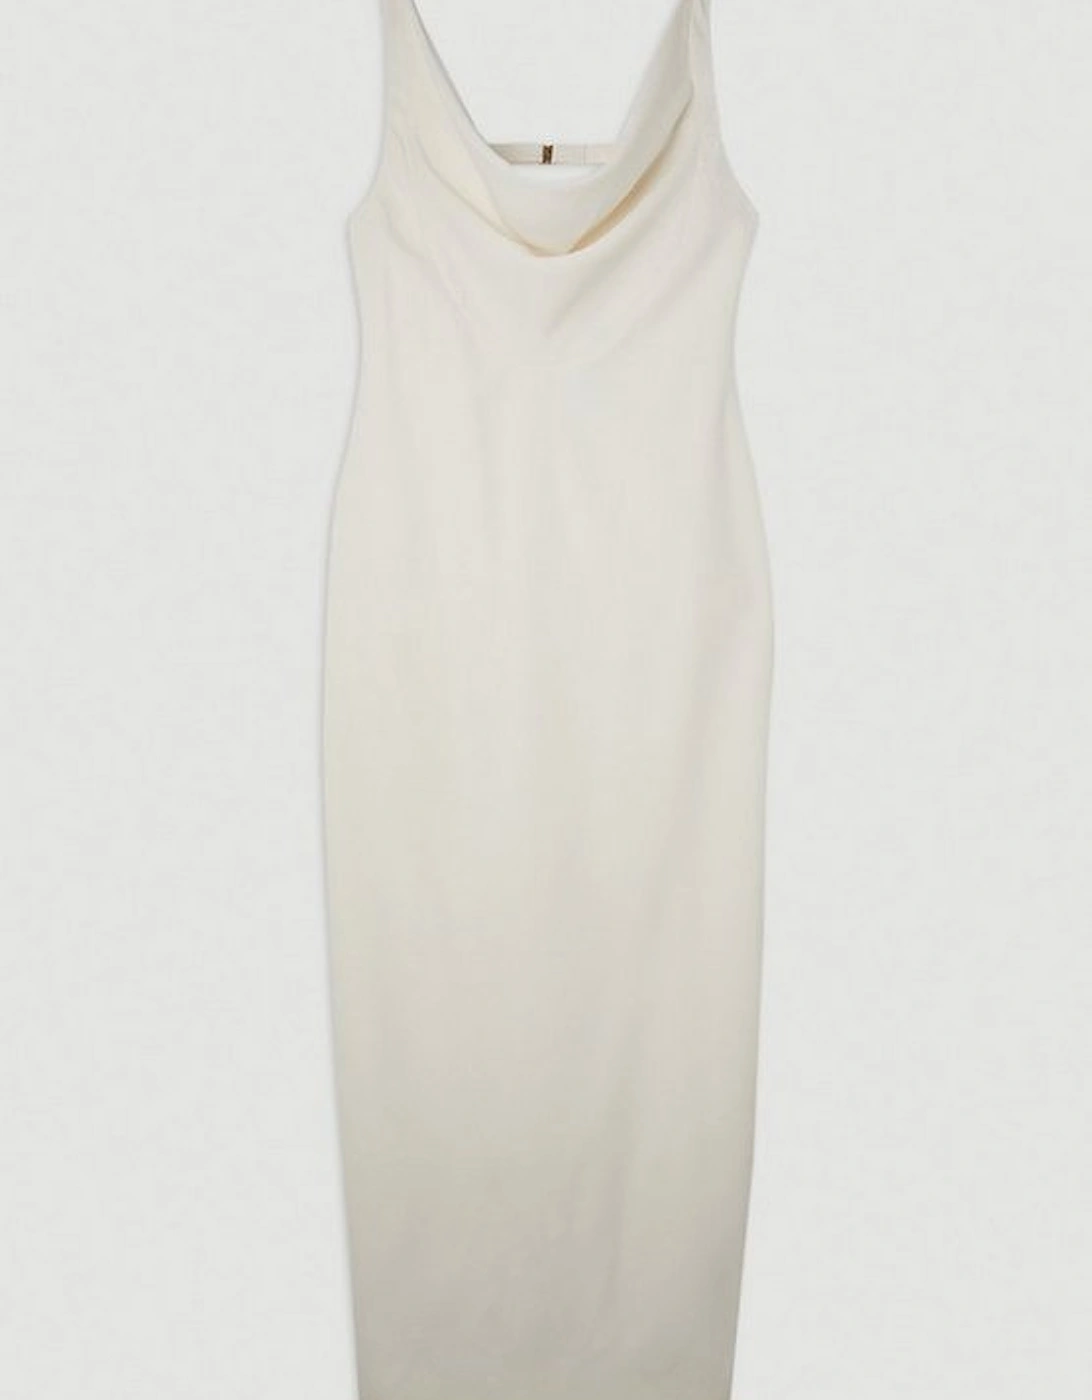 Fluid Tailored Cowl Neck Backless Maxi Dress